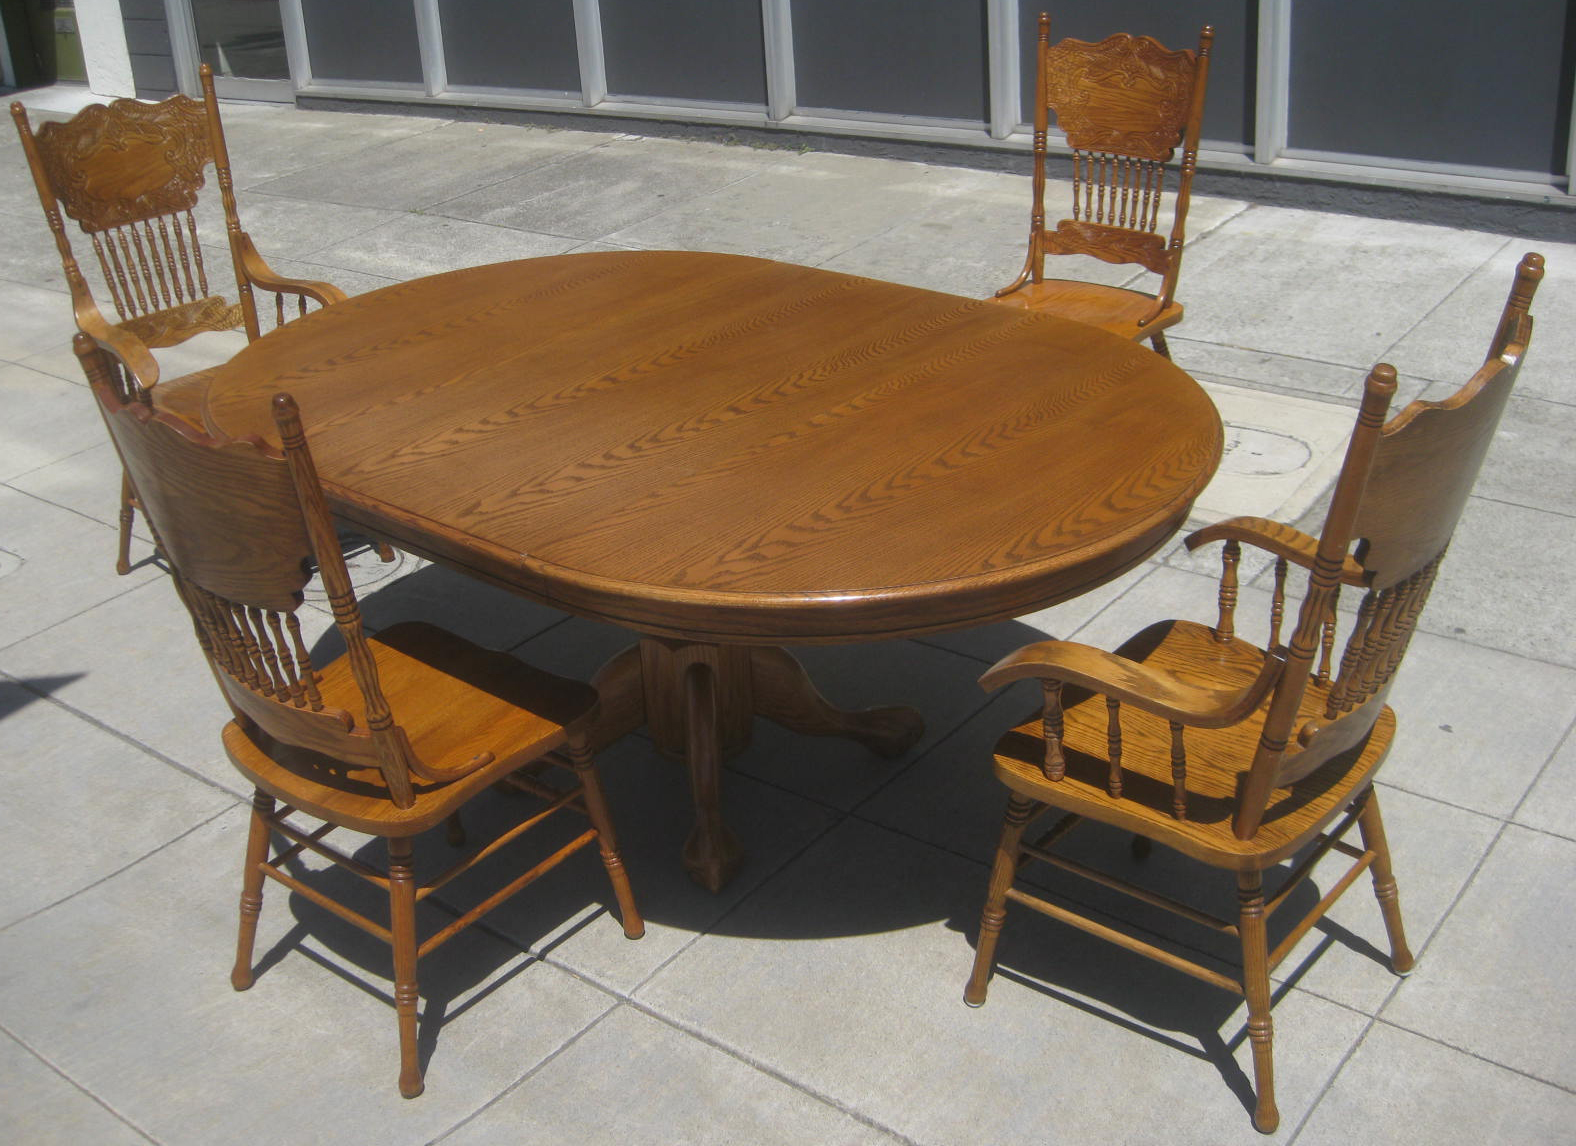 UHURU FURNITURE & COLLECTIBLES: SOLD - Oak Pedestal Dining Table + Leaf + 4 Chairs - $145